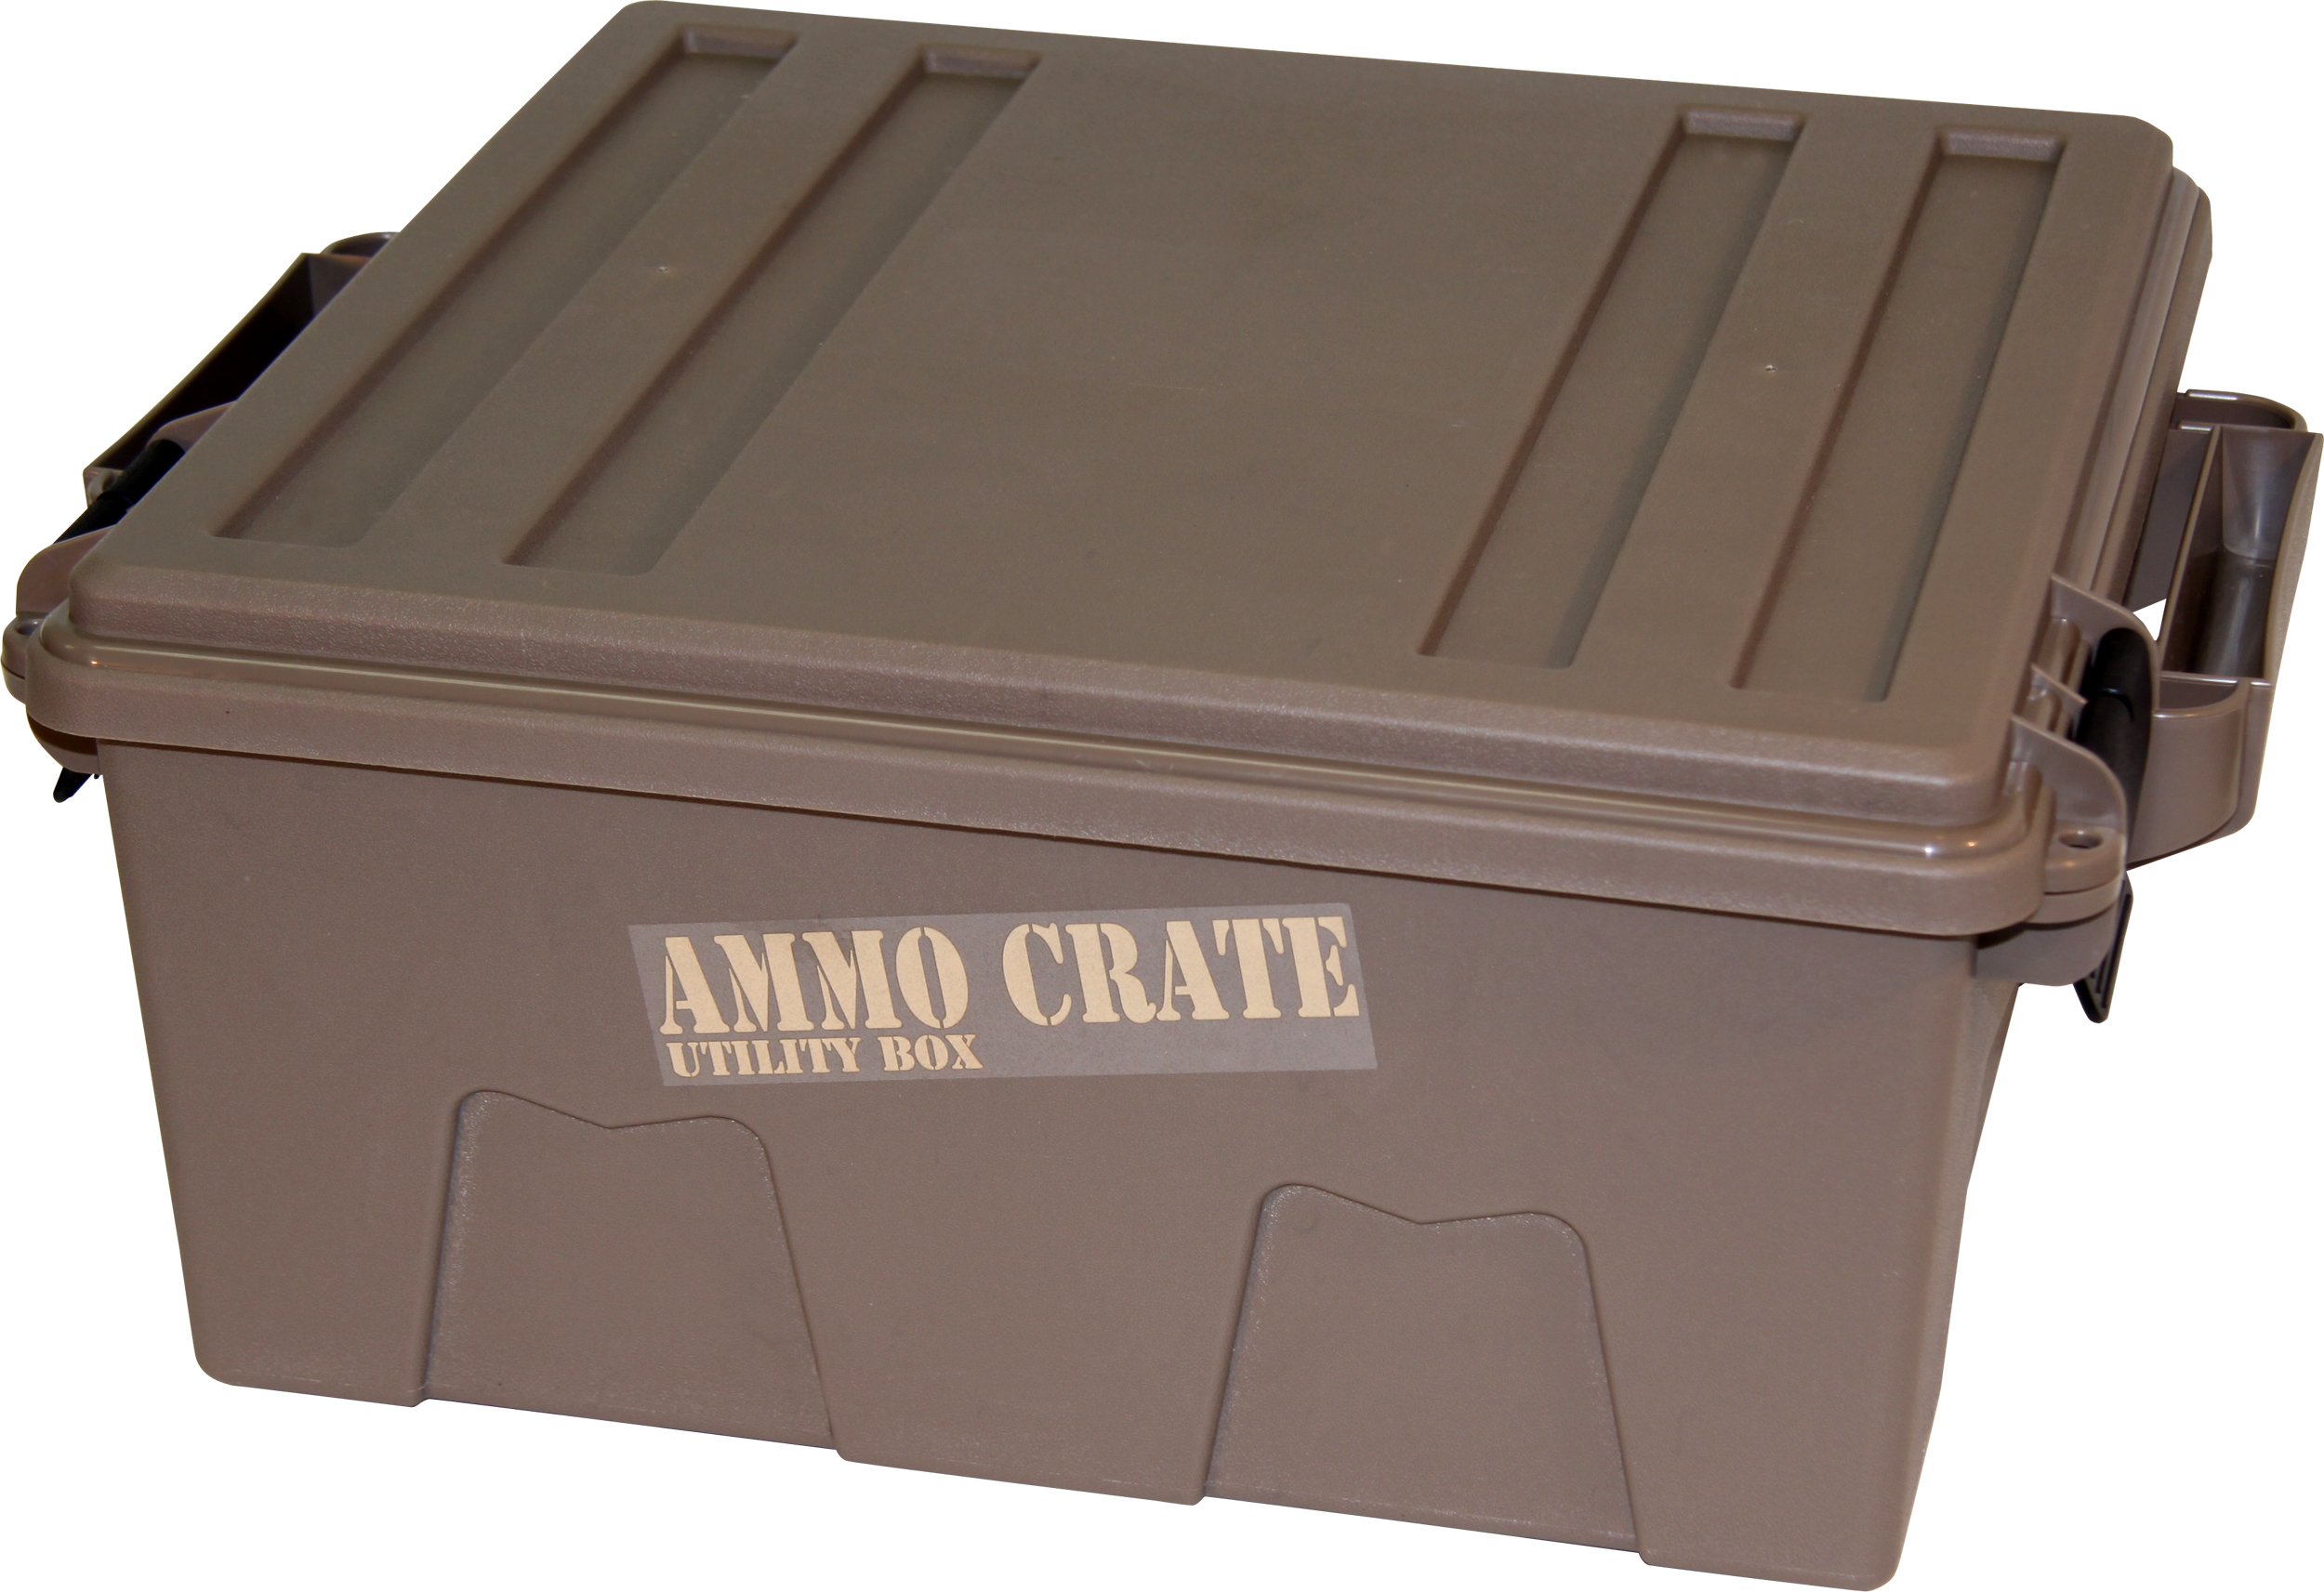 ACR8-72 Ammo Crate Utility Box